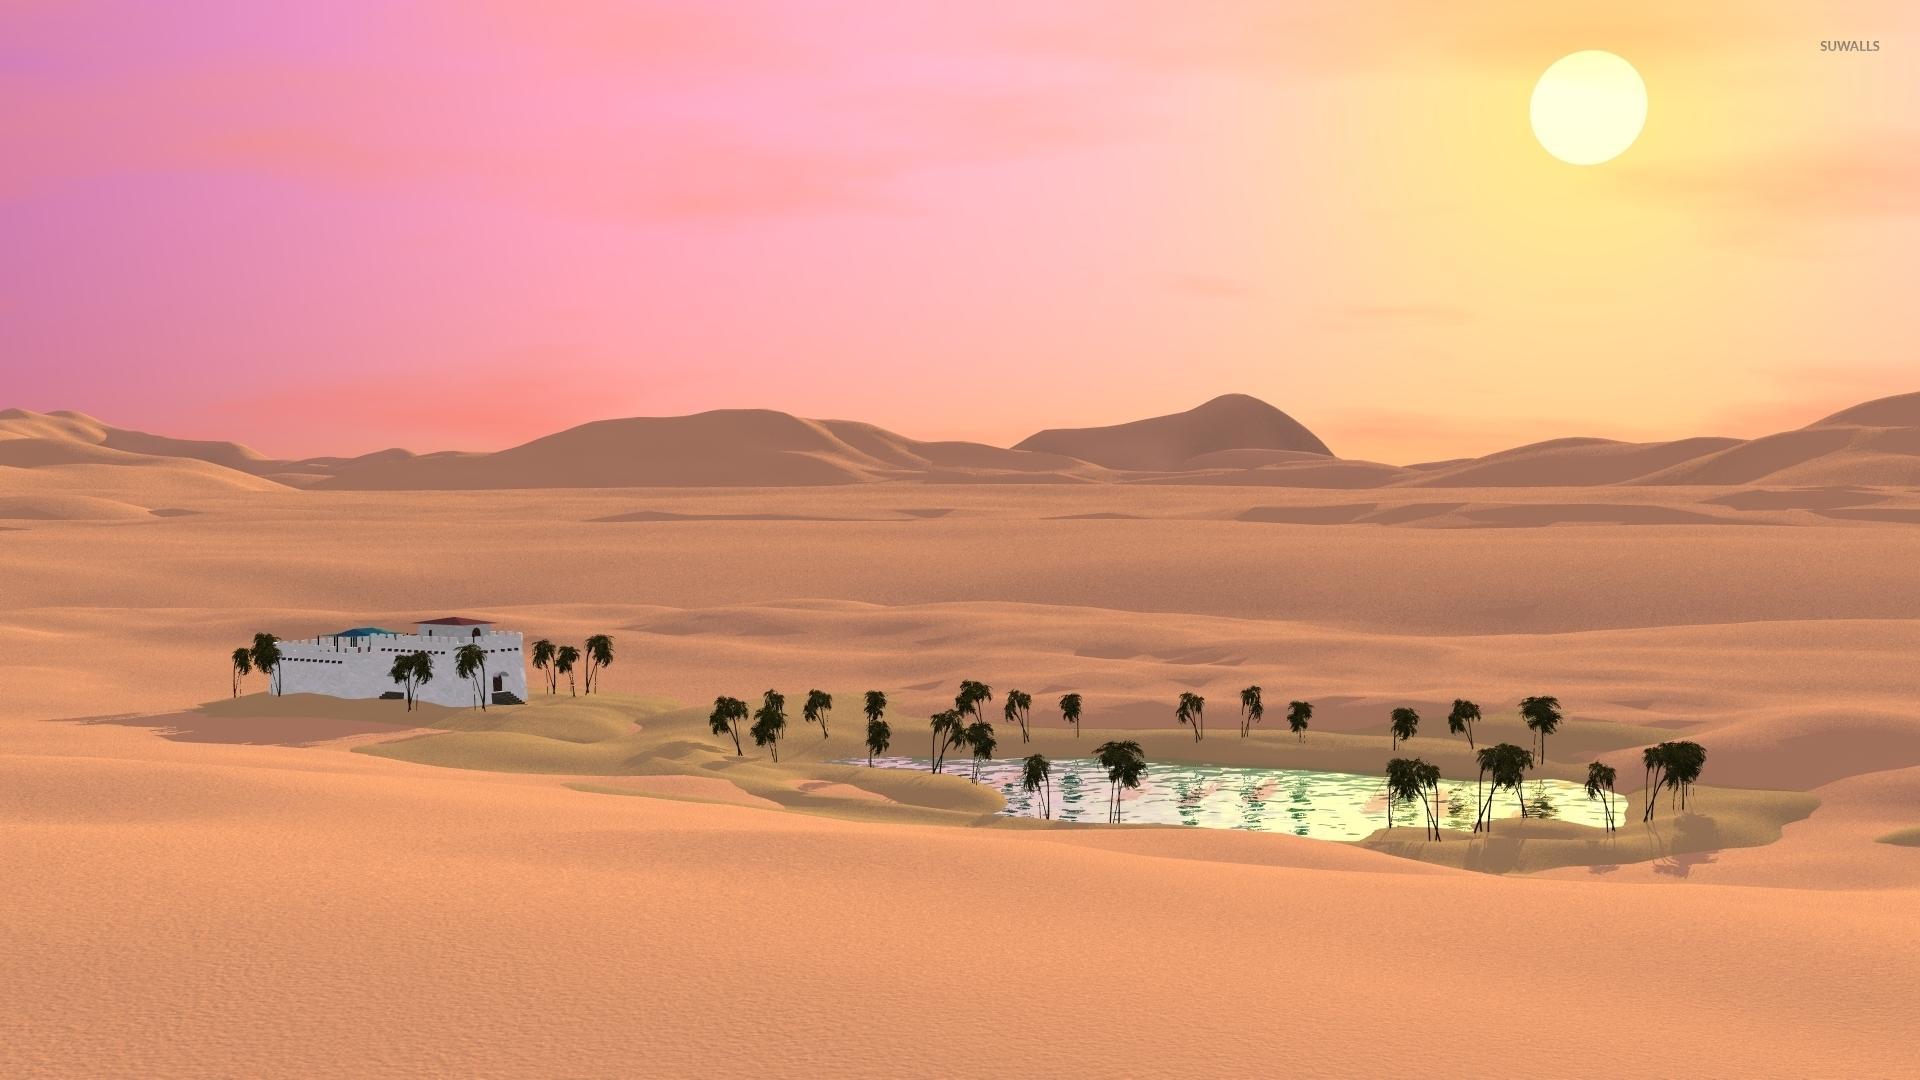 Oasis Wallpaper HD Group Picture